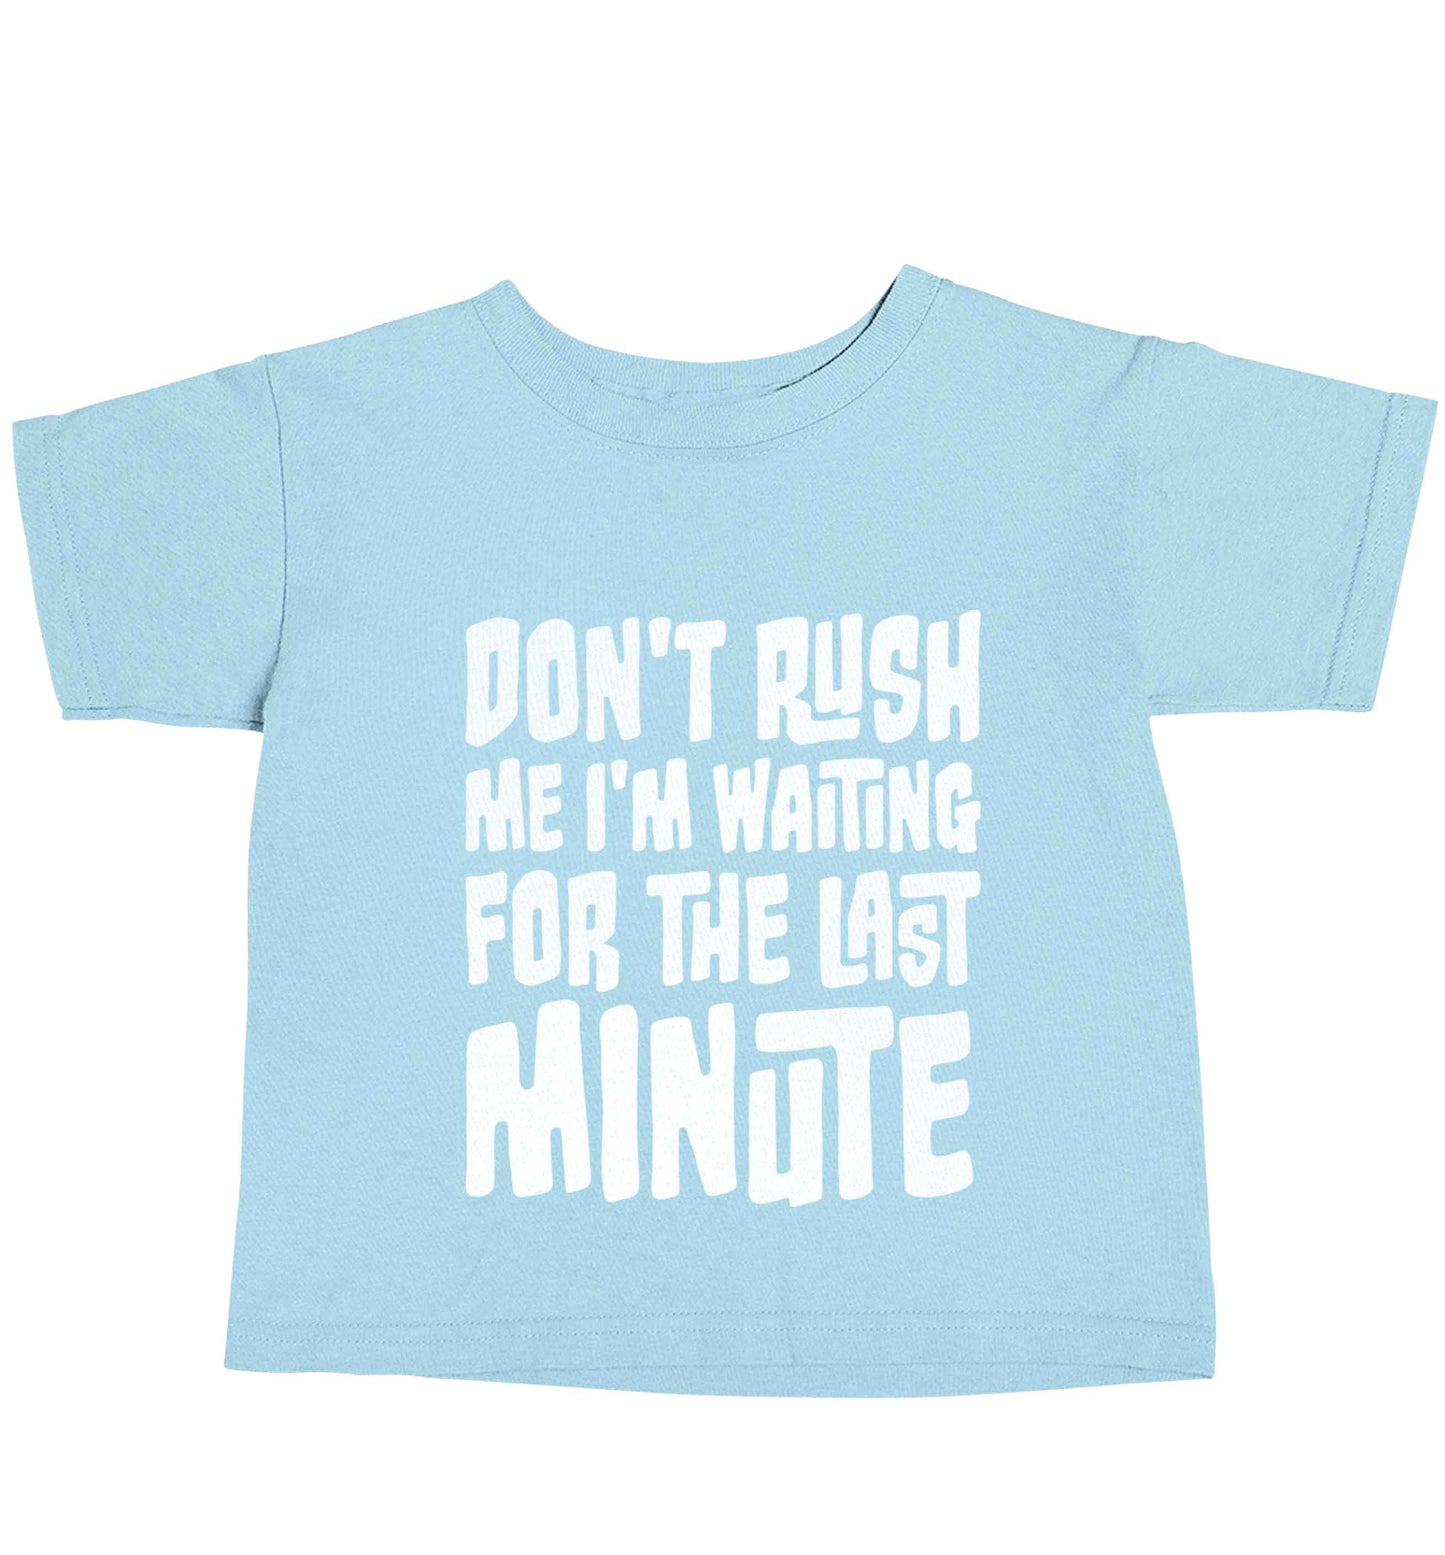 Don't rush me I'm waiting for the last minute light blue baby toddler Tshirt 2 Years